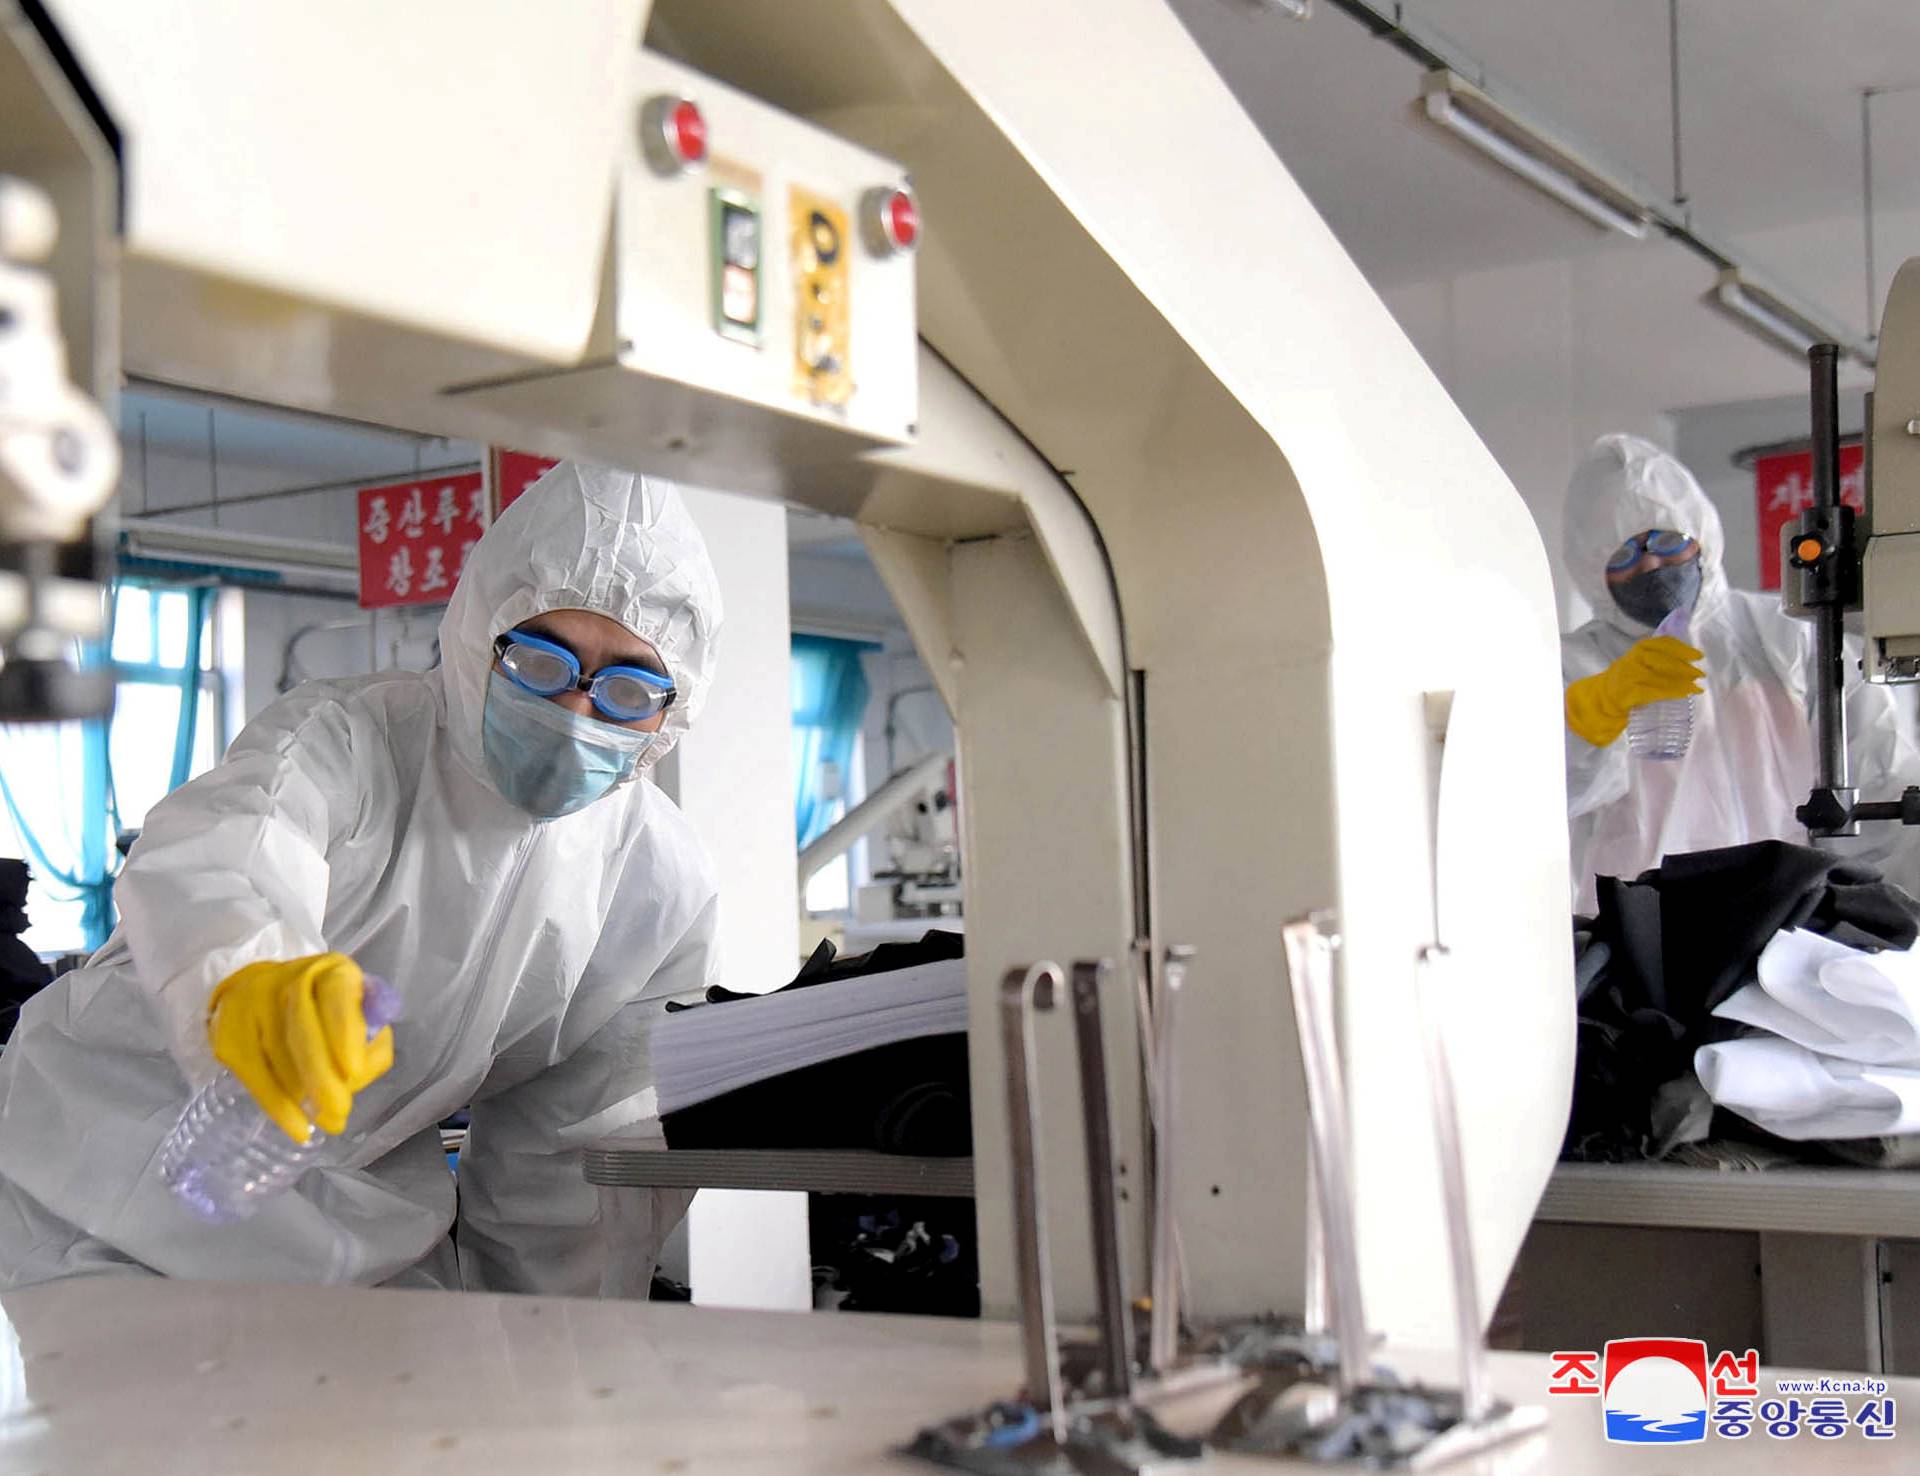 FILE PHOTO: KCNA picture of volunteers carrying out disinfection work during an anti-virus campaign in Pyongyang